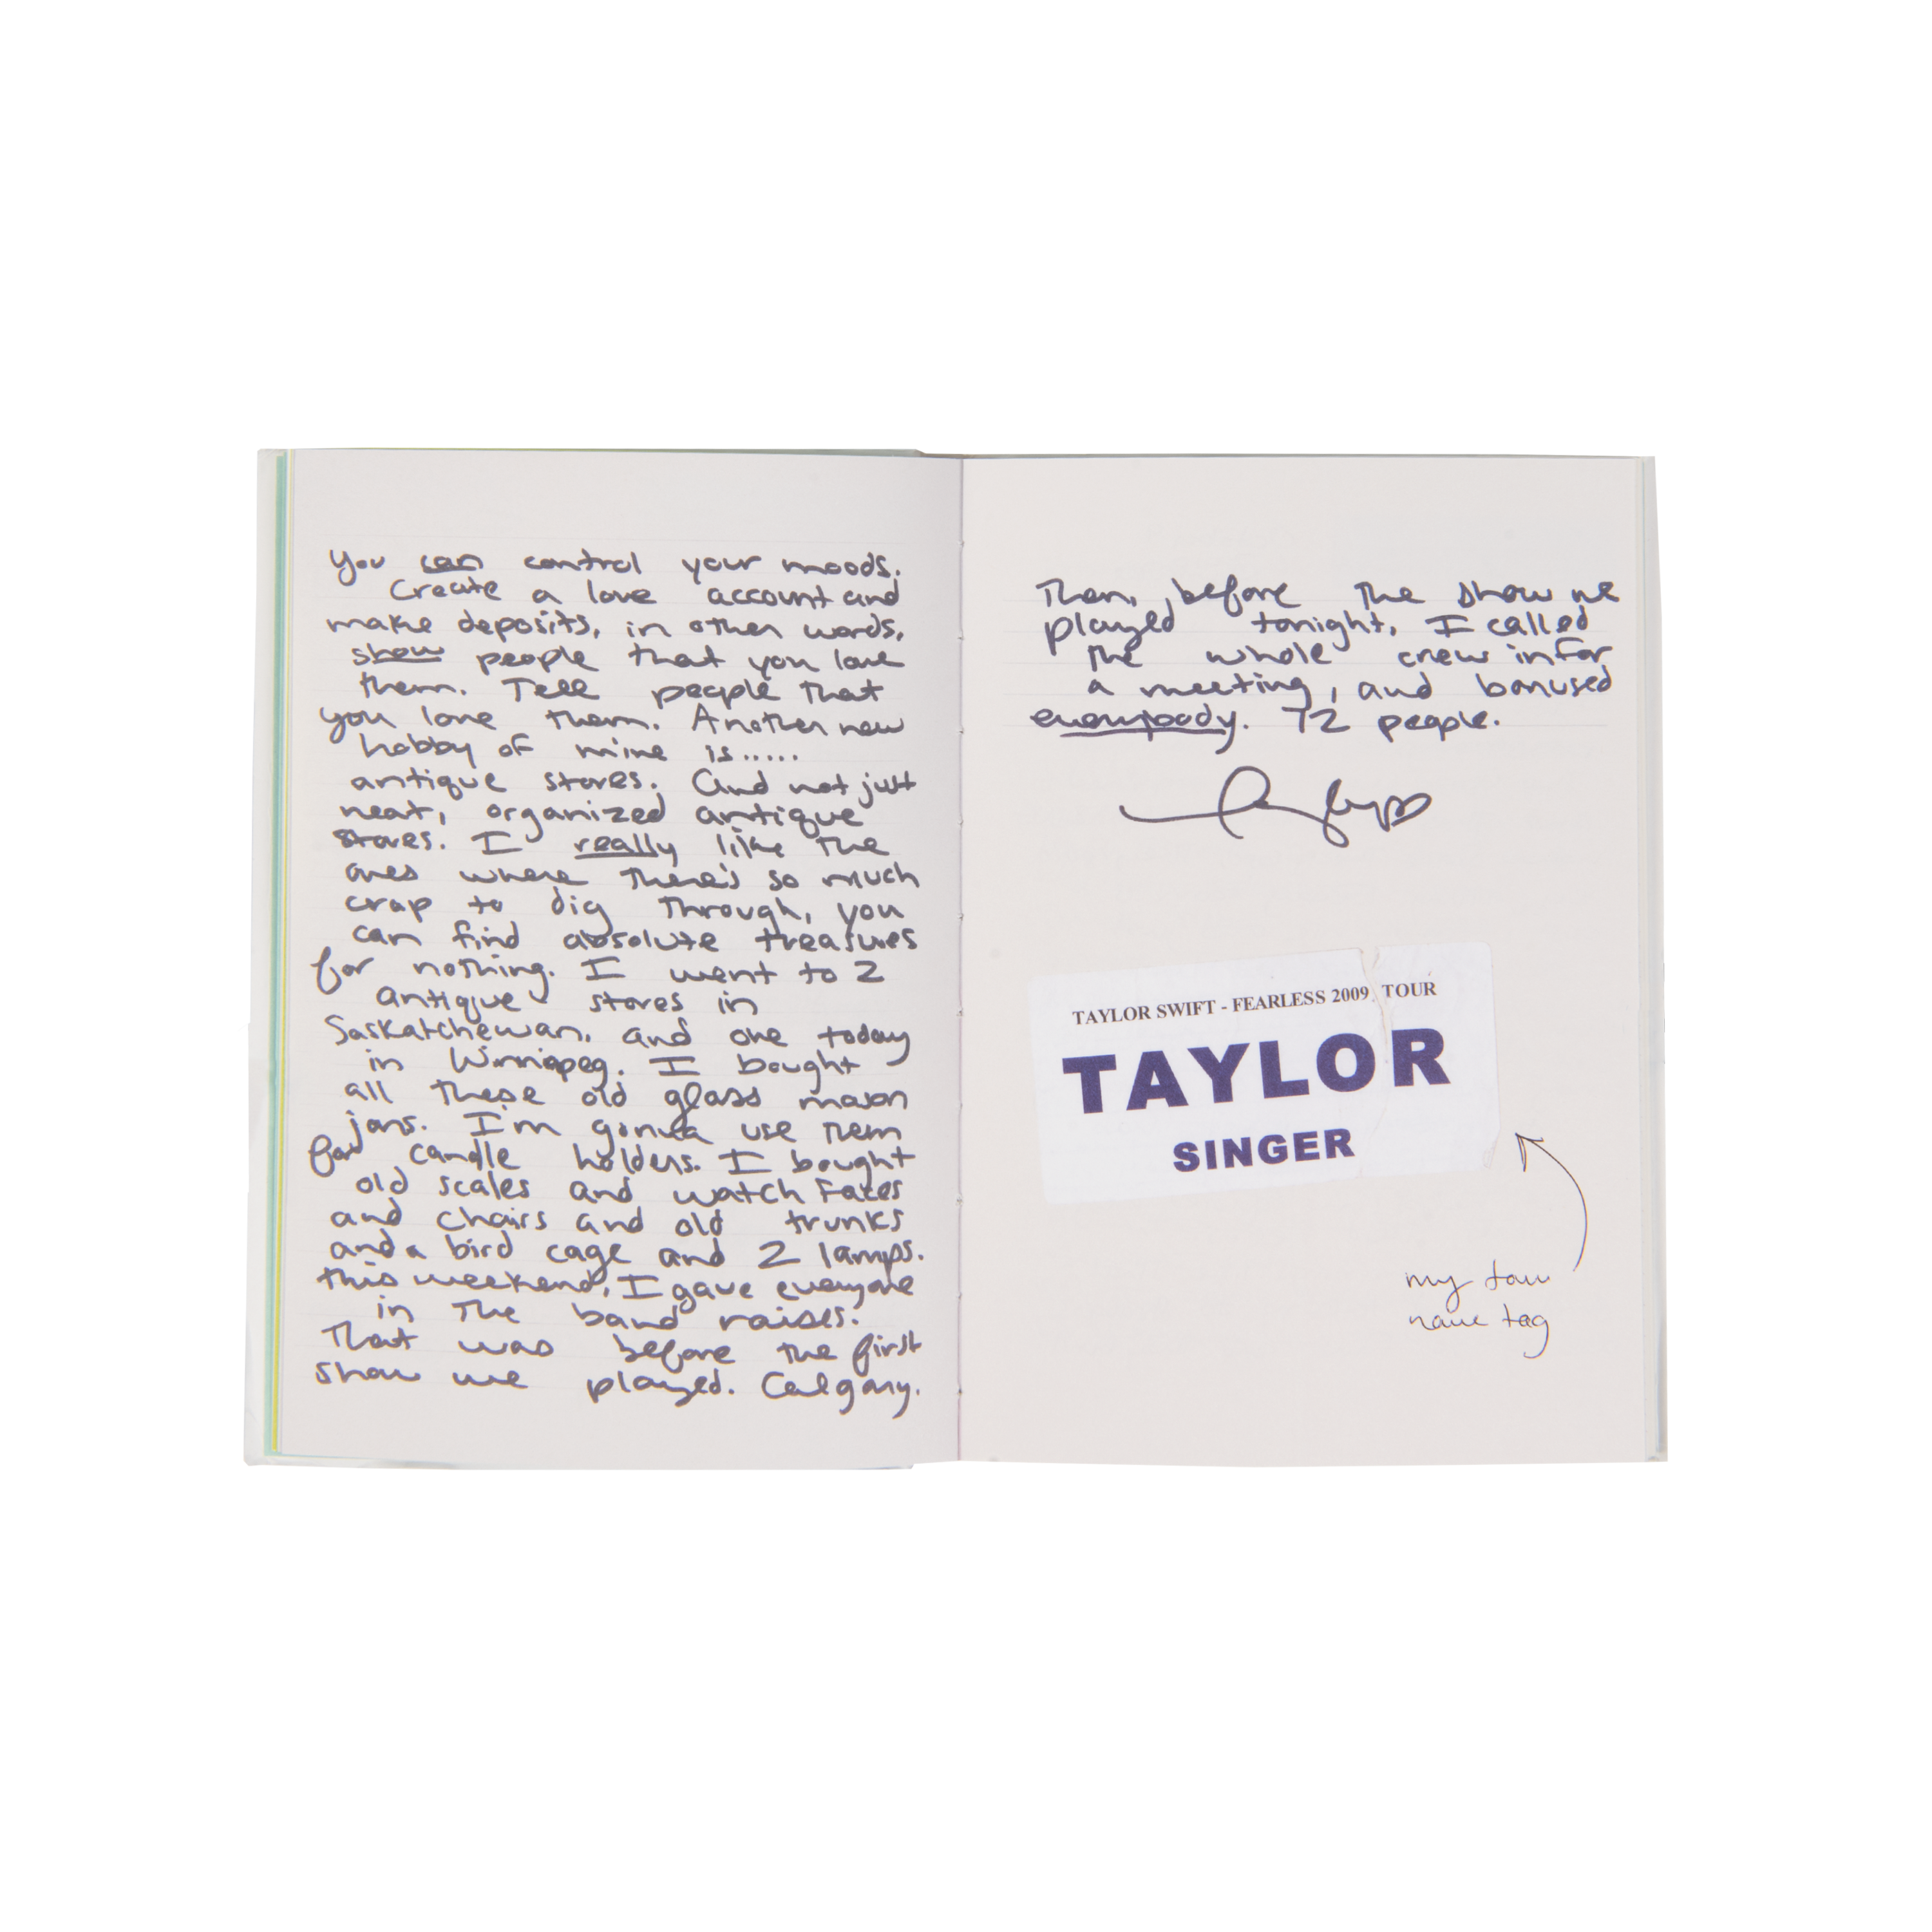 Lover CD Deluxe Version 3 Taylor's Journal